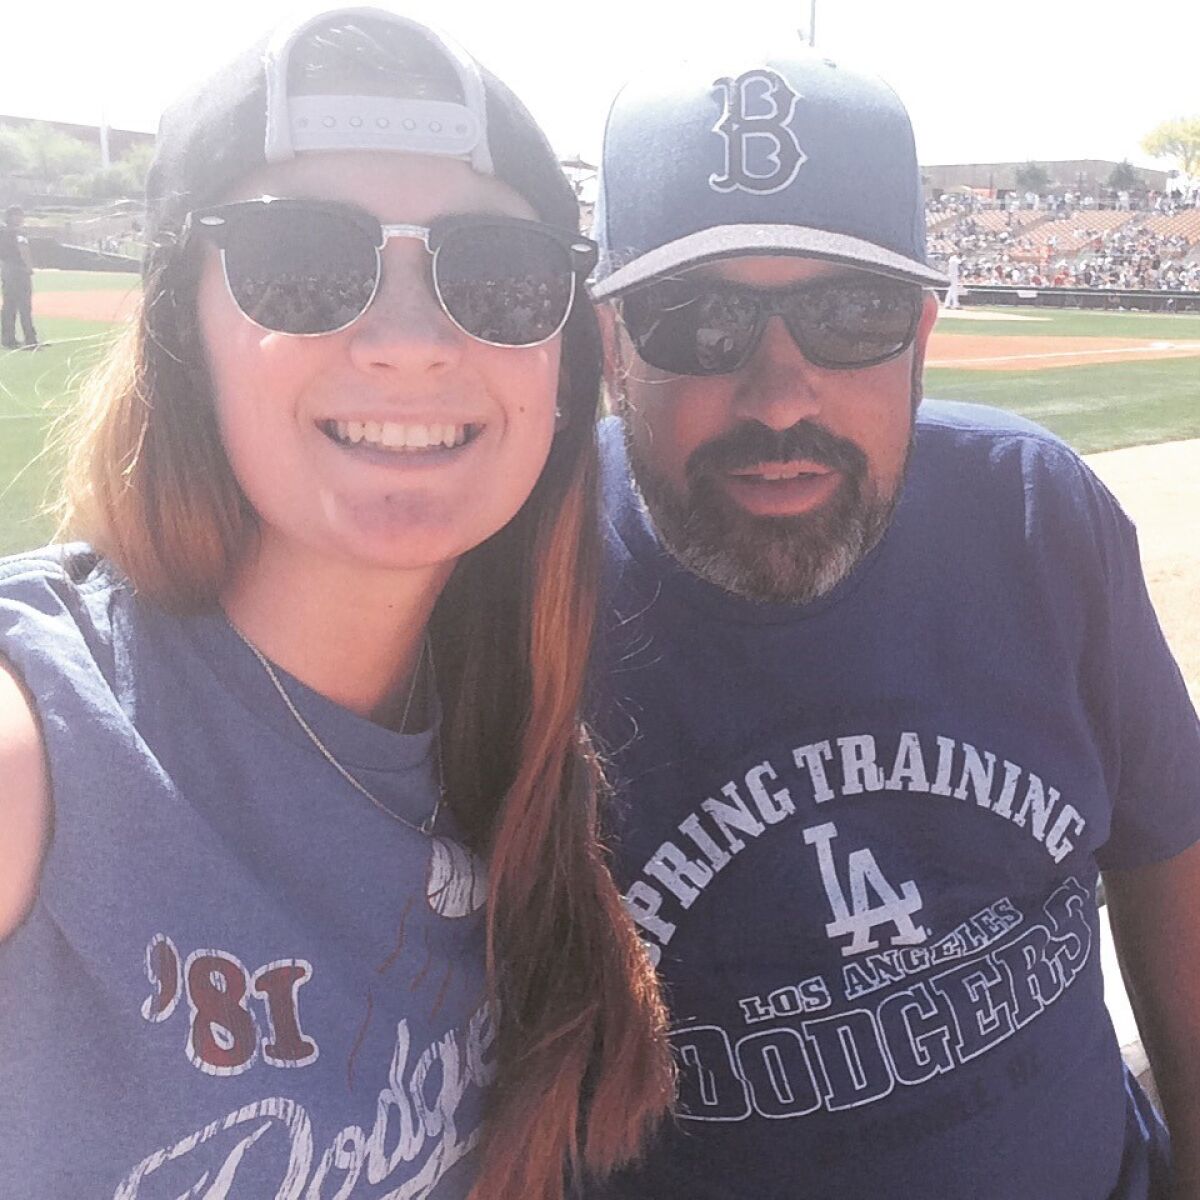 Michael Lennon with his daugther, Emily Lennon, catching the Dodgers' last spring training game in Arizona this past March.